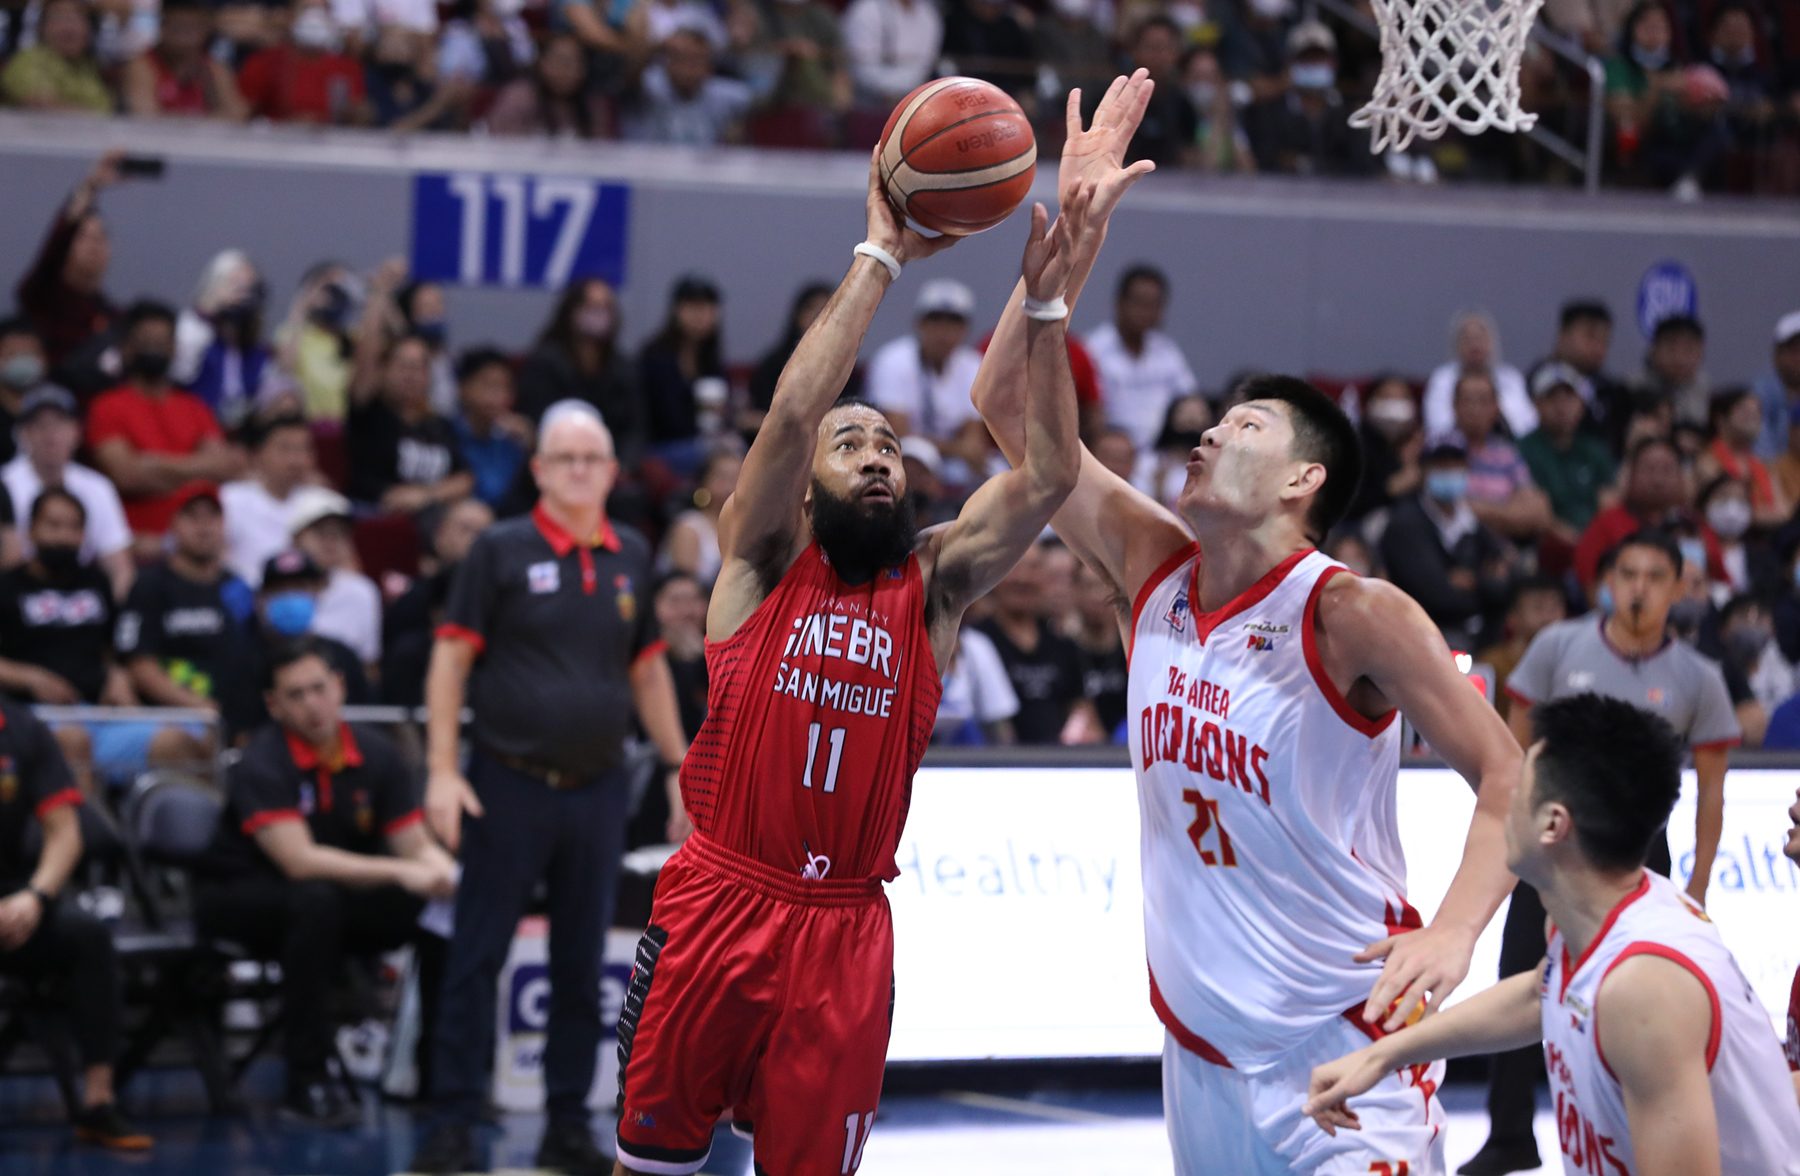 Pringle turns back clock as Ginebra pushes Bay Area to brink in PBA finals